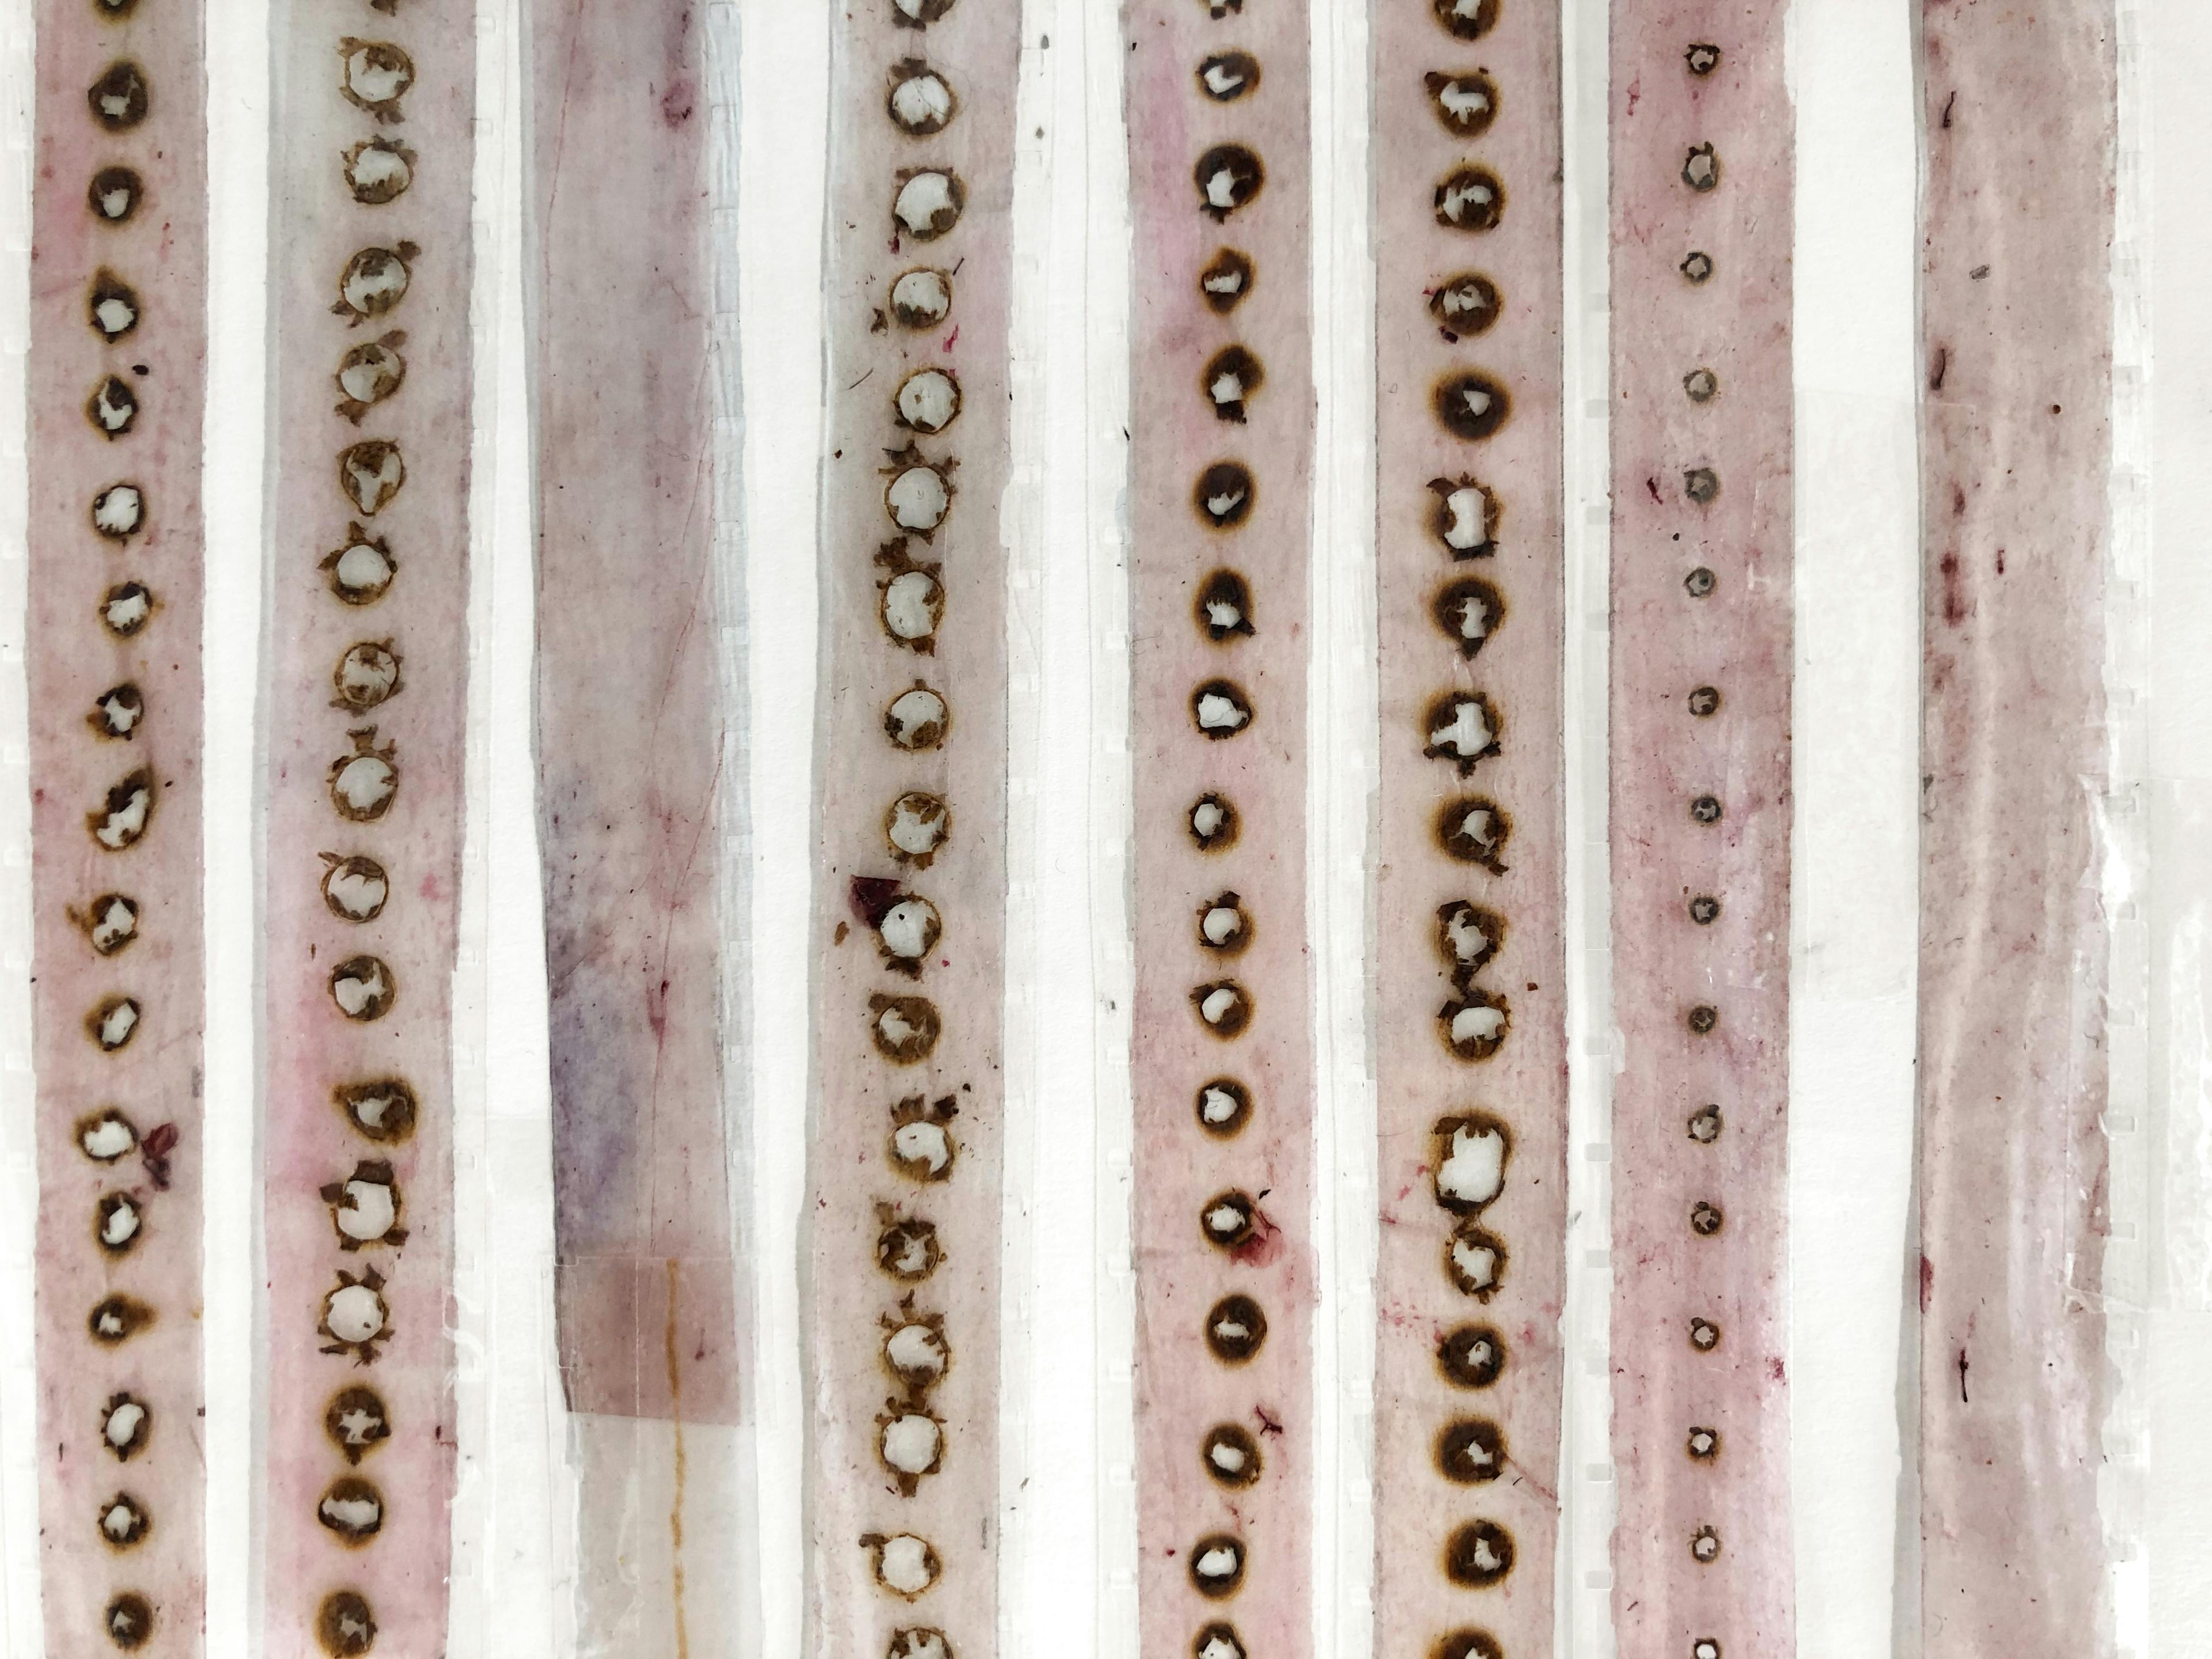 Several strips of hand-treated pint film with holes like cigarette burns are displayed on a white surface.